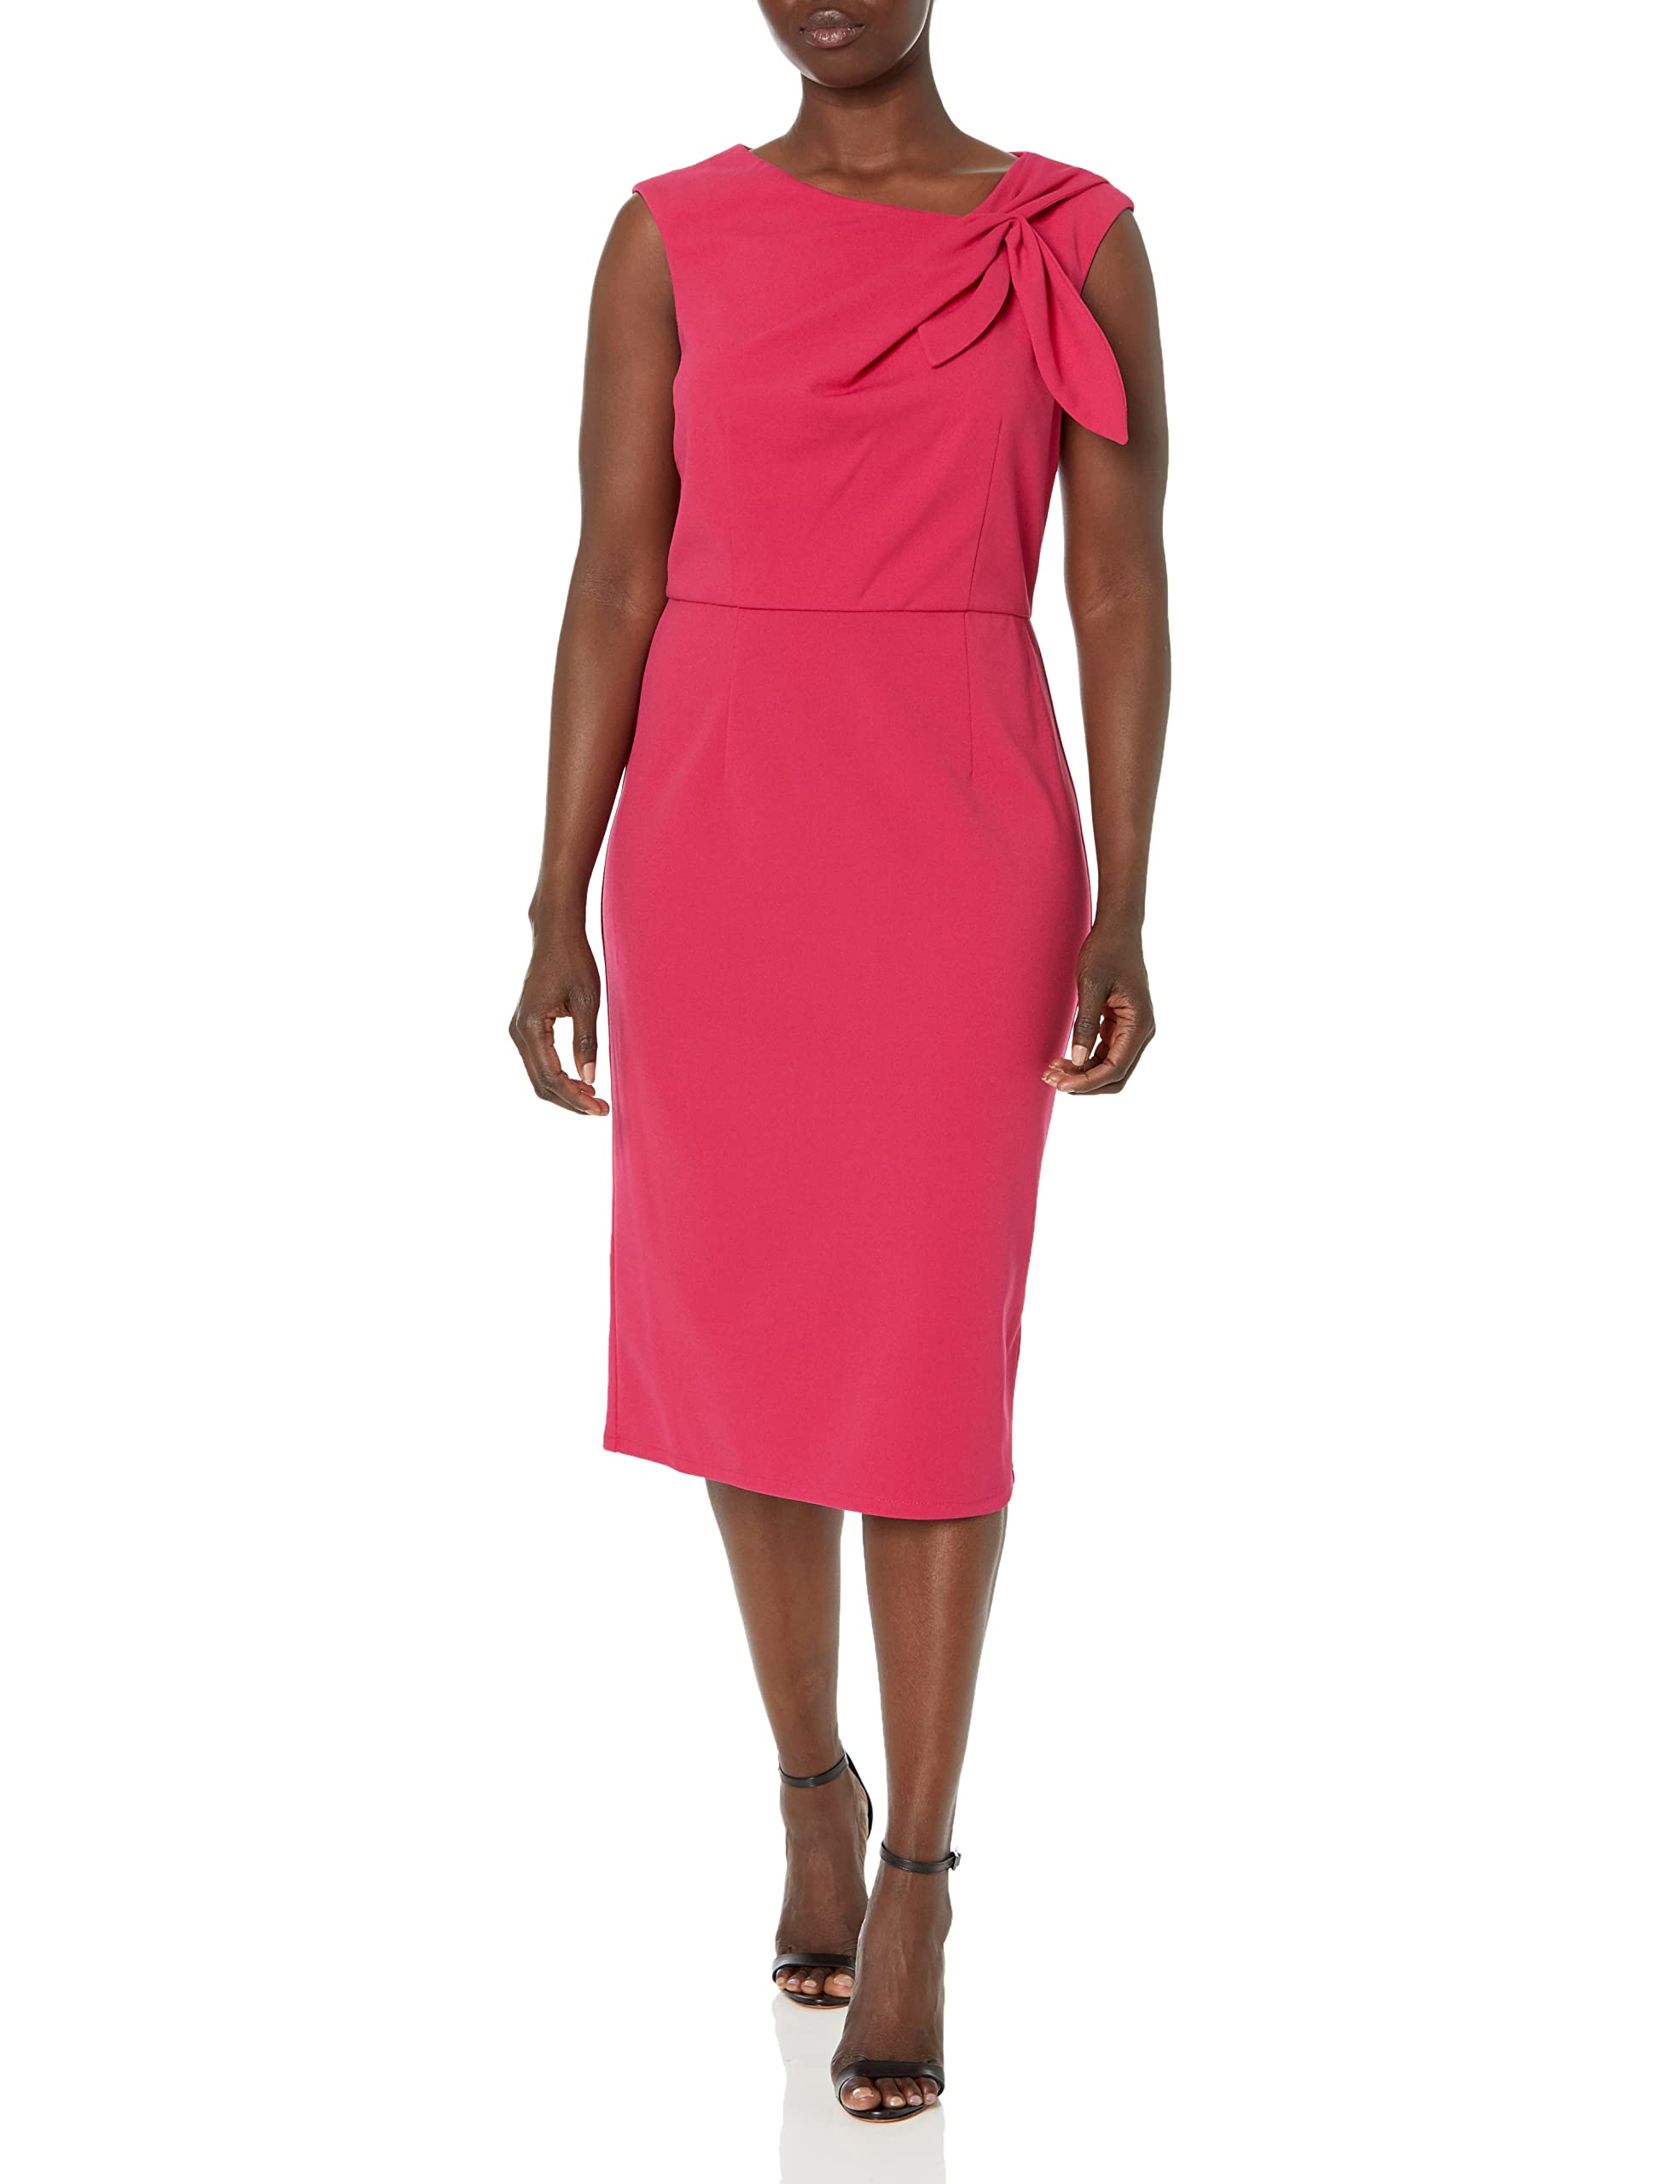 London Times Women's Sleeveless Sheath Dress with Draping and Bow Detail at Bodice